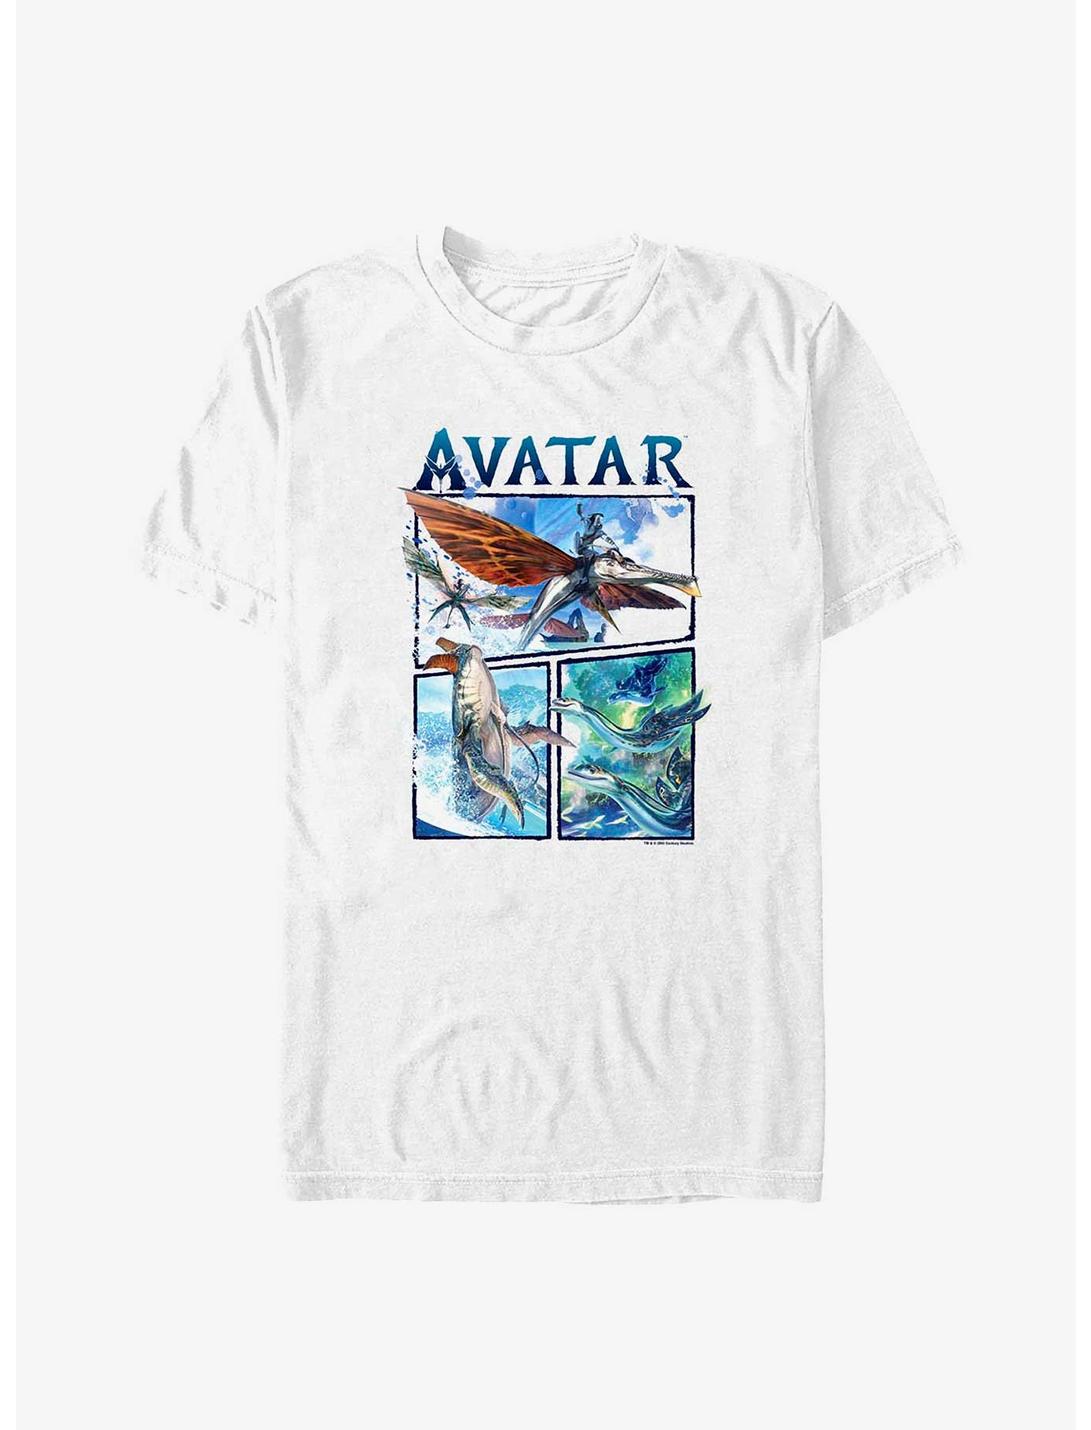 Avatar: The Way Of The Water Creatures Air And Sea T-Shirt, WHITE, hi-res